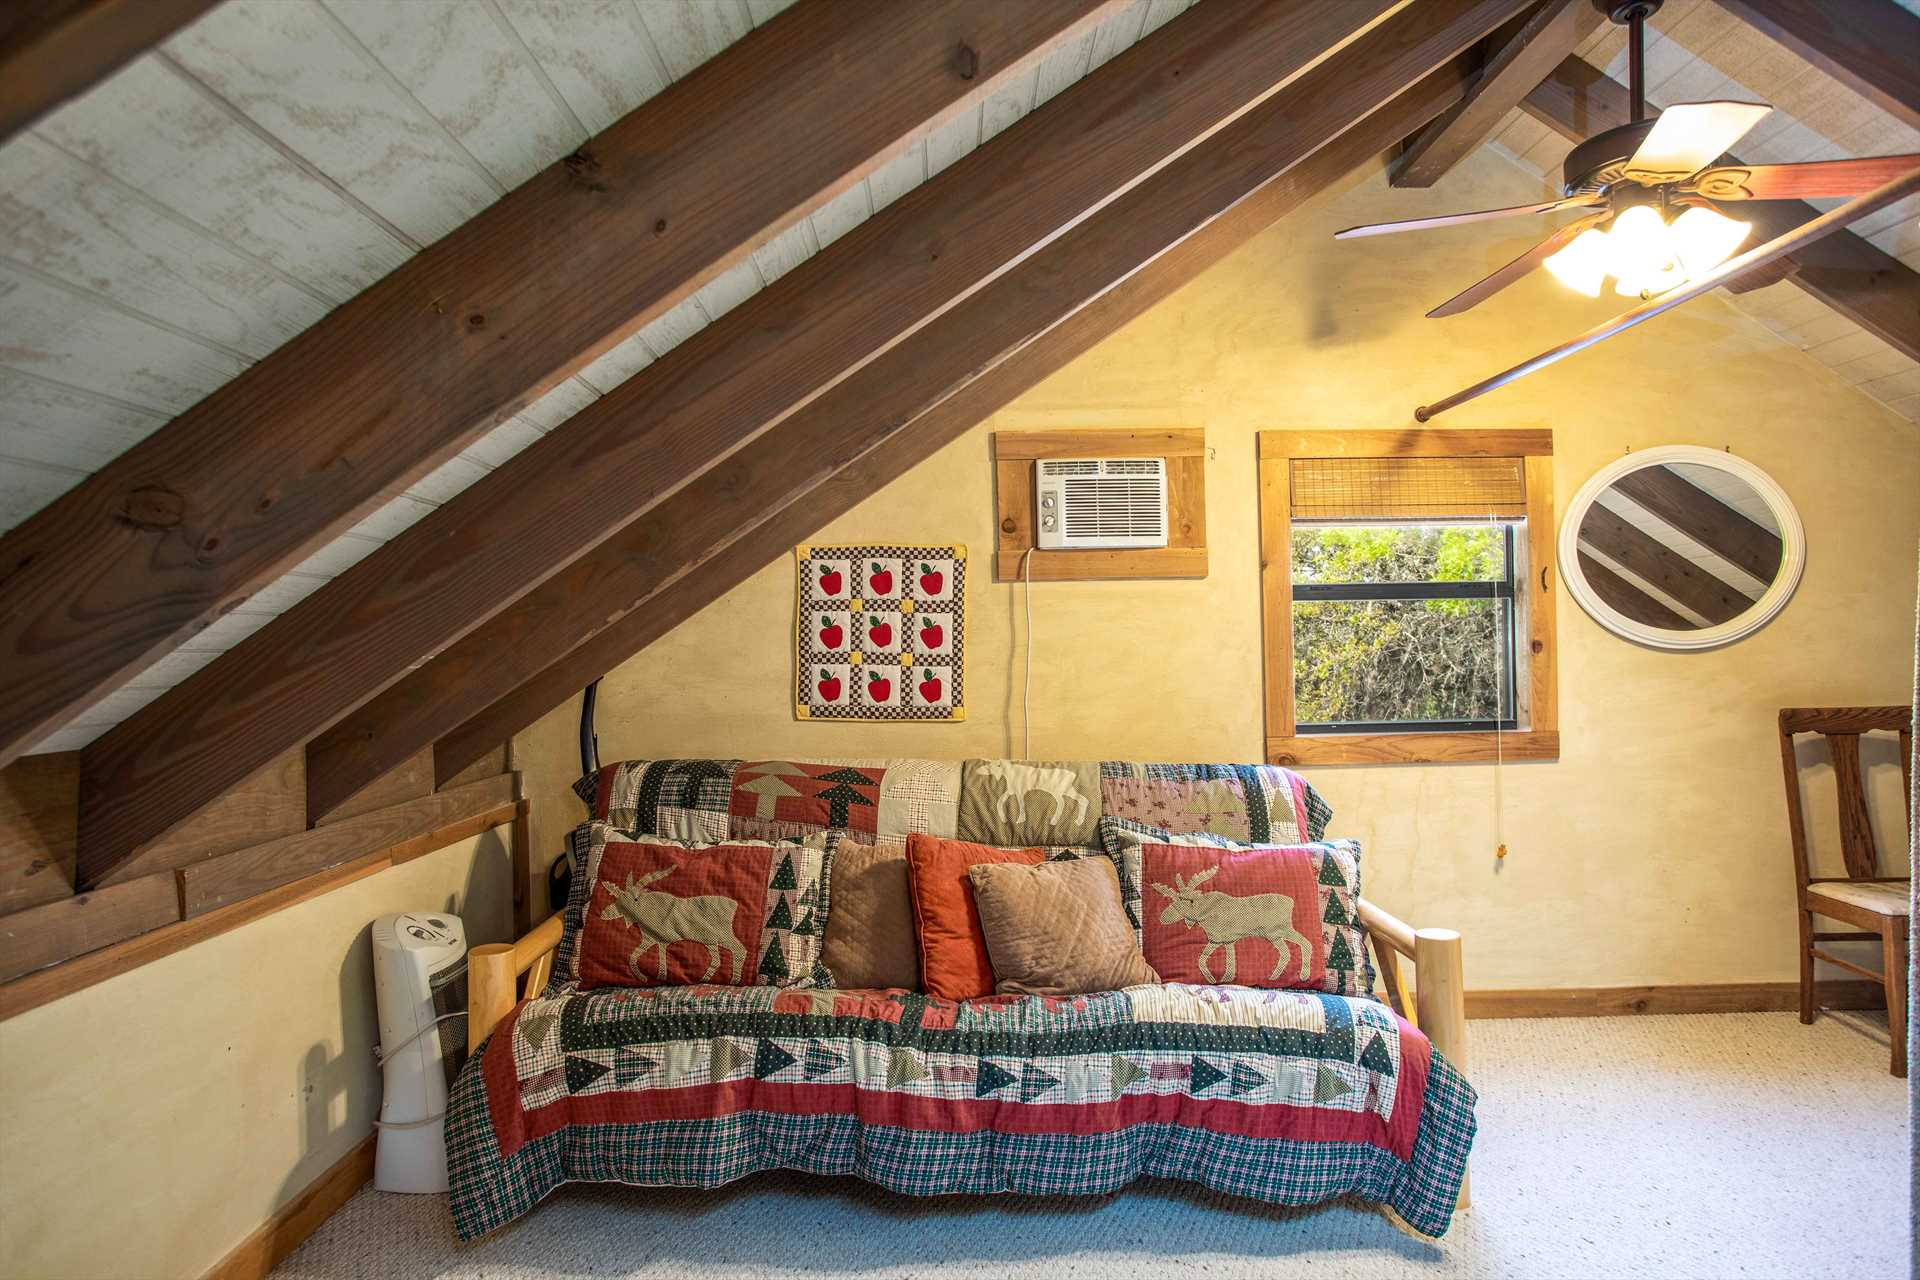                                                 Also up in the loft is a futon dressed in country flair-and it folds out to provide peaceful slumber for two.